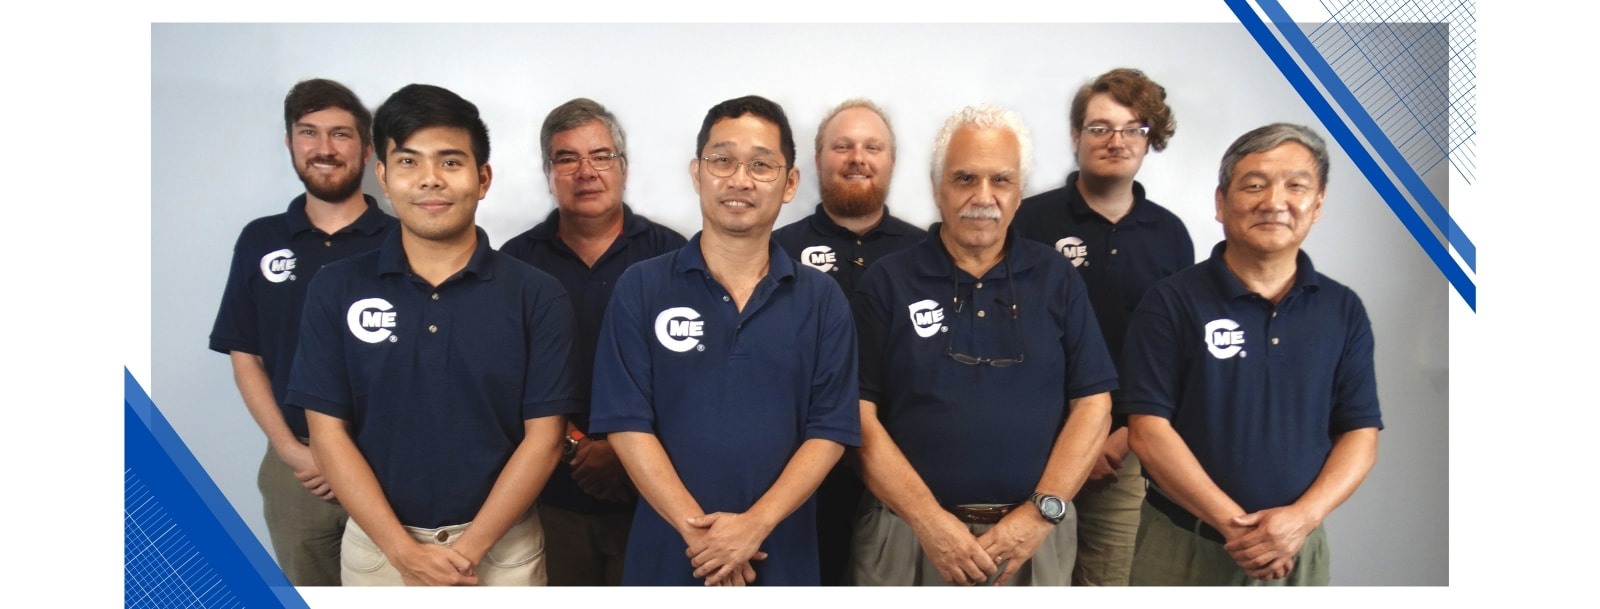 Engineering team at custom manufacturing and engineering